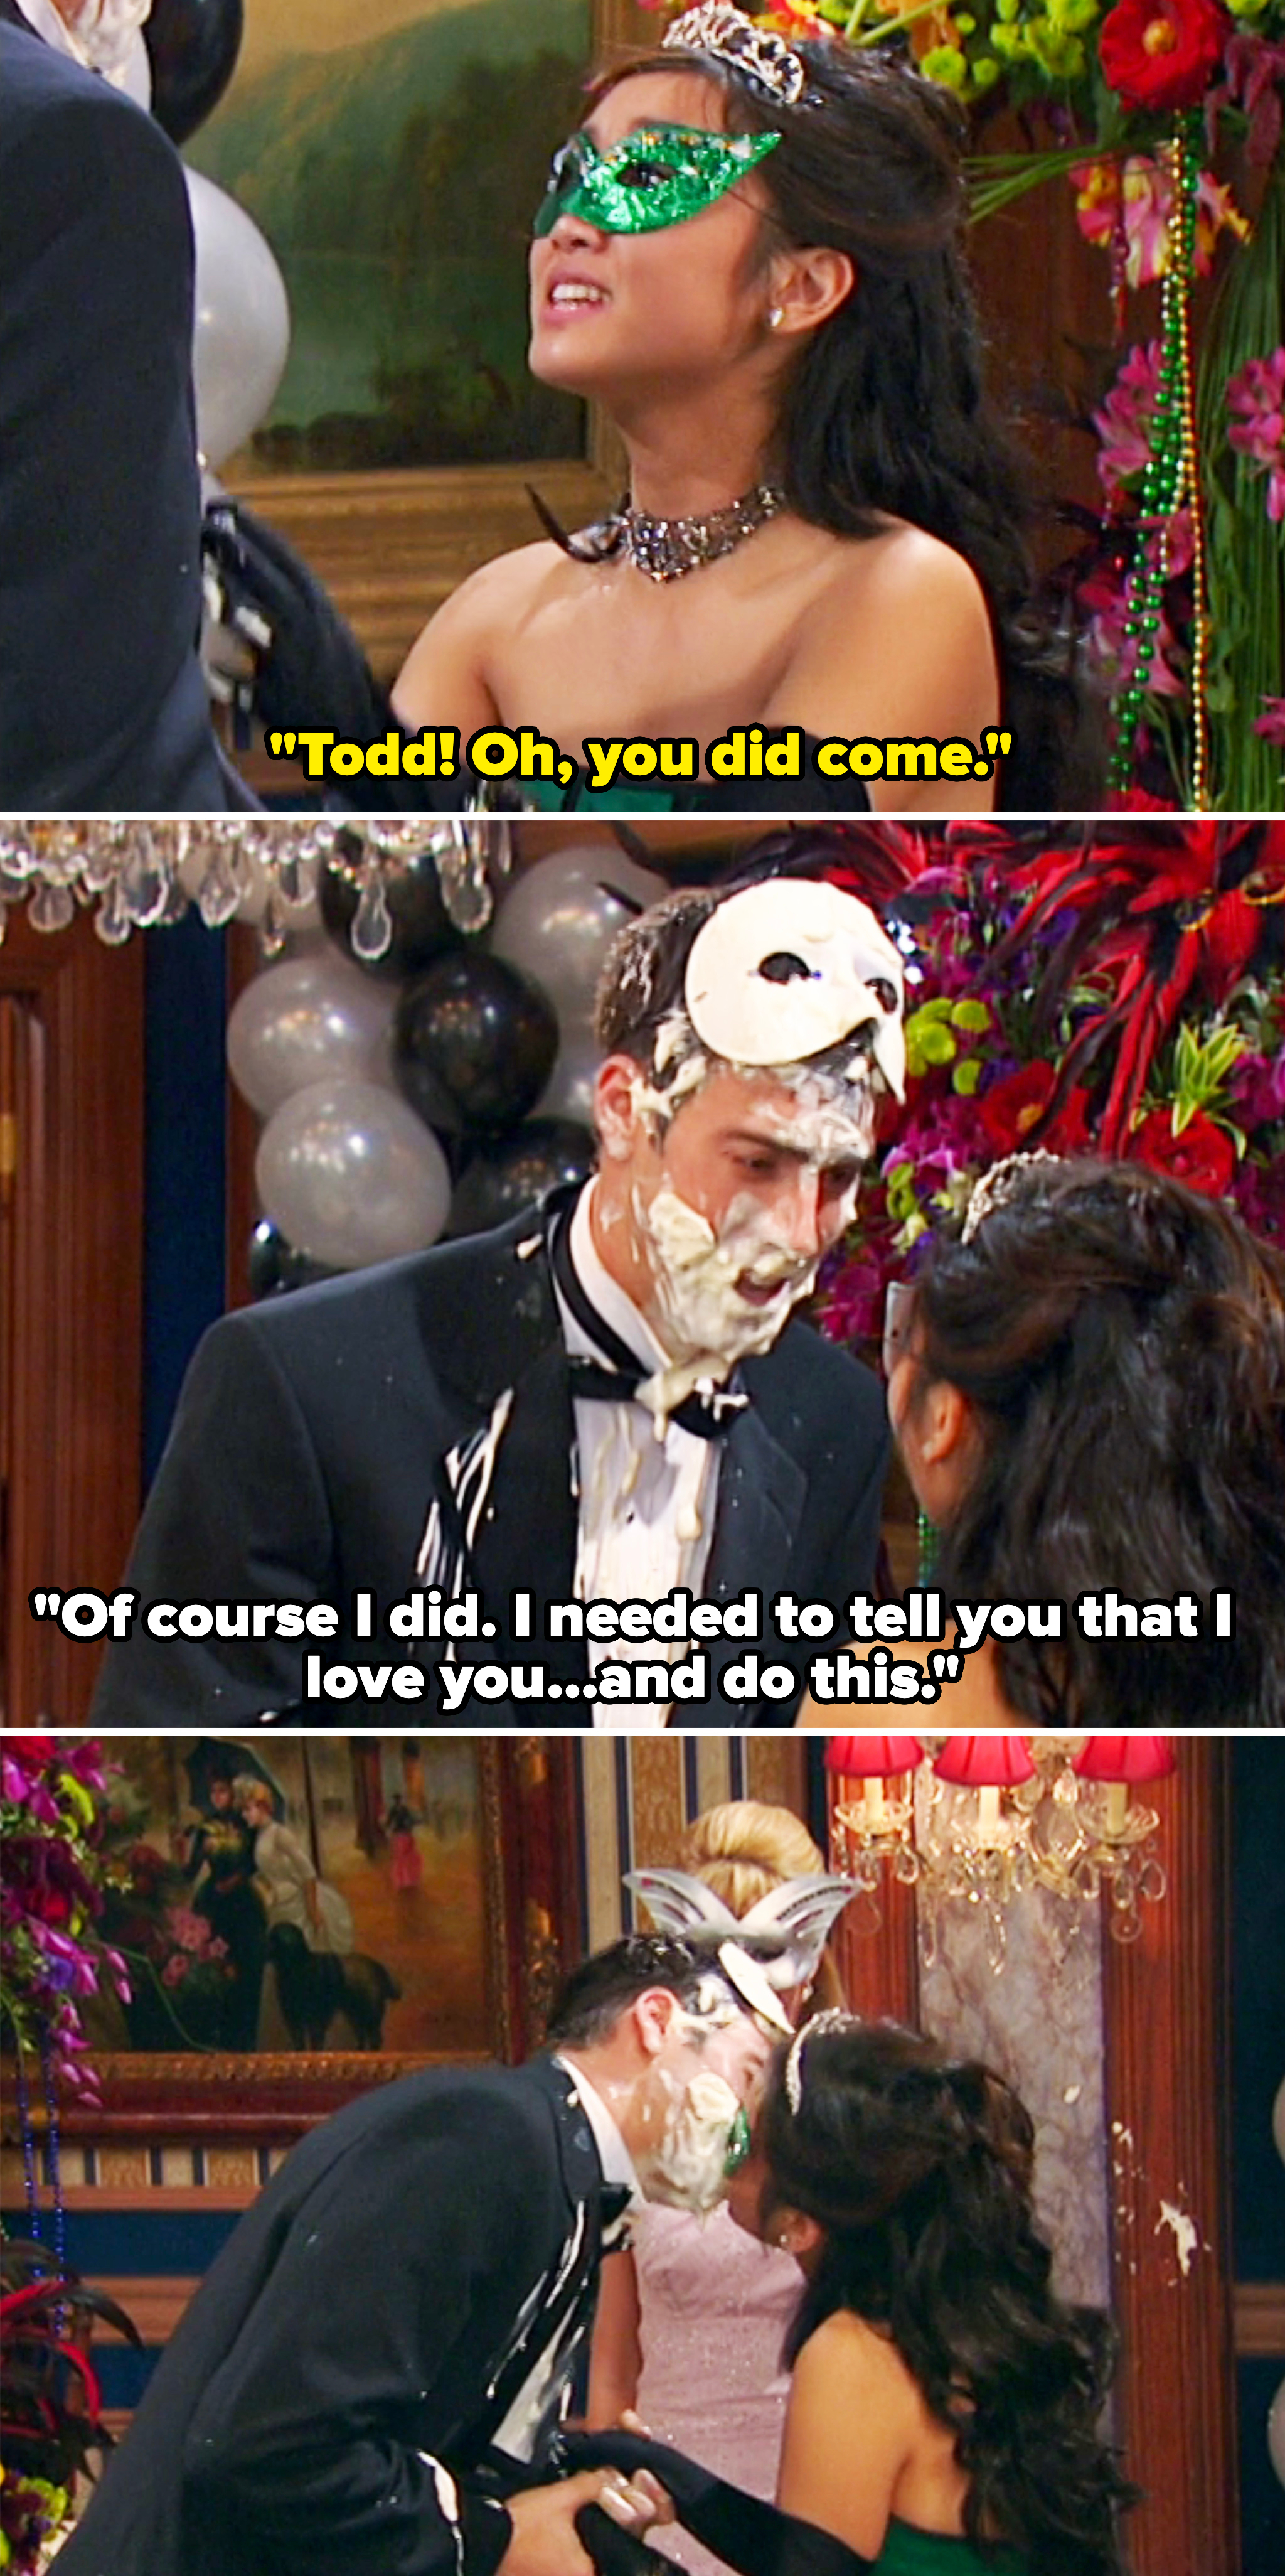 Todd and London kissing at a masquerade ball in The Suite Life of Zack and Cody